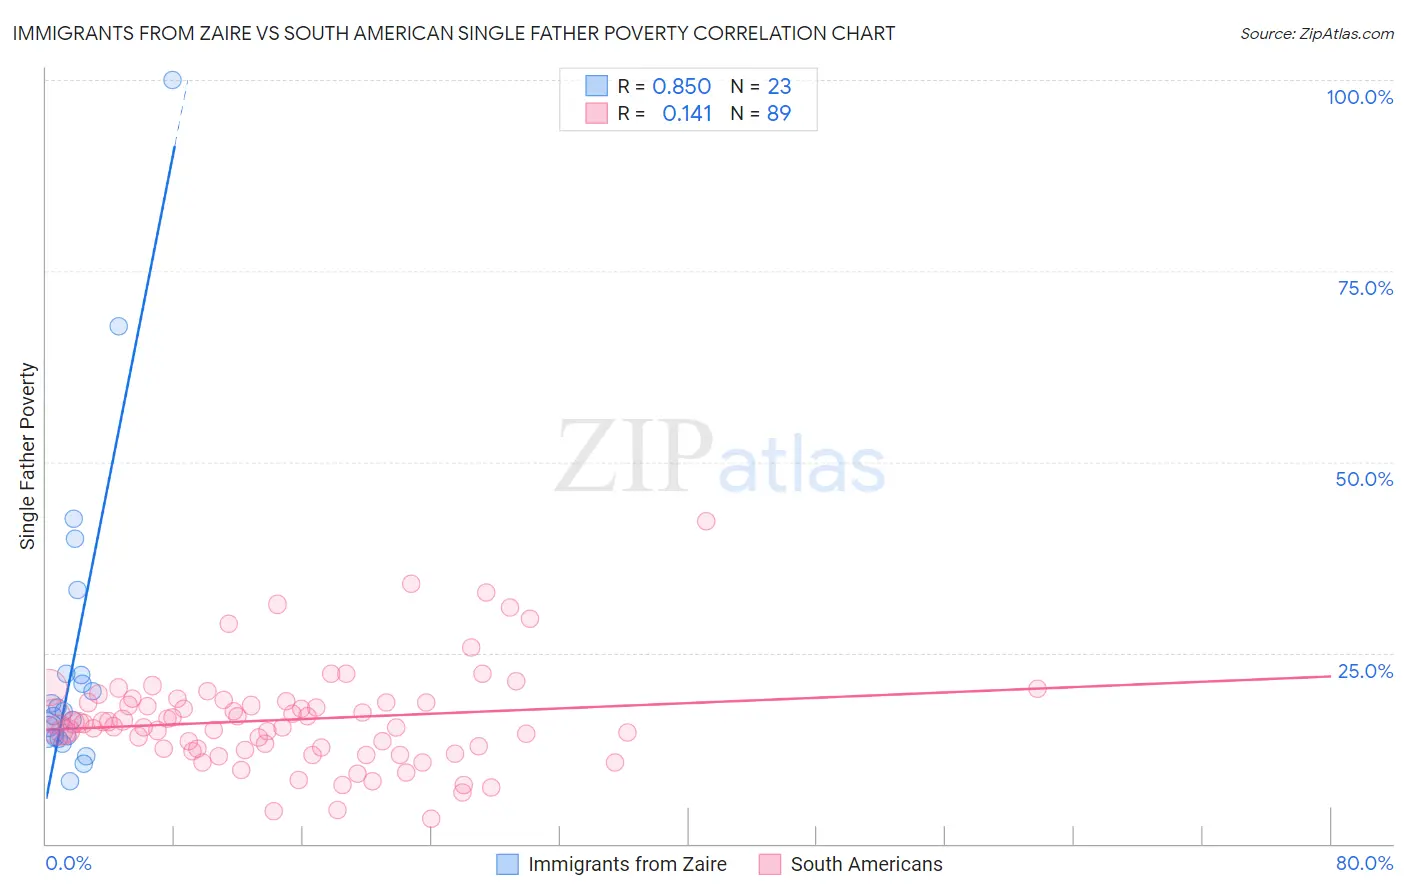 Immigrants from Zaire vs South American Single Father Poverty